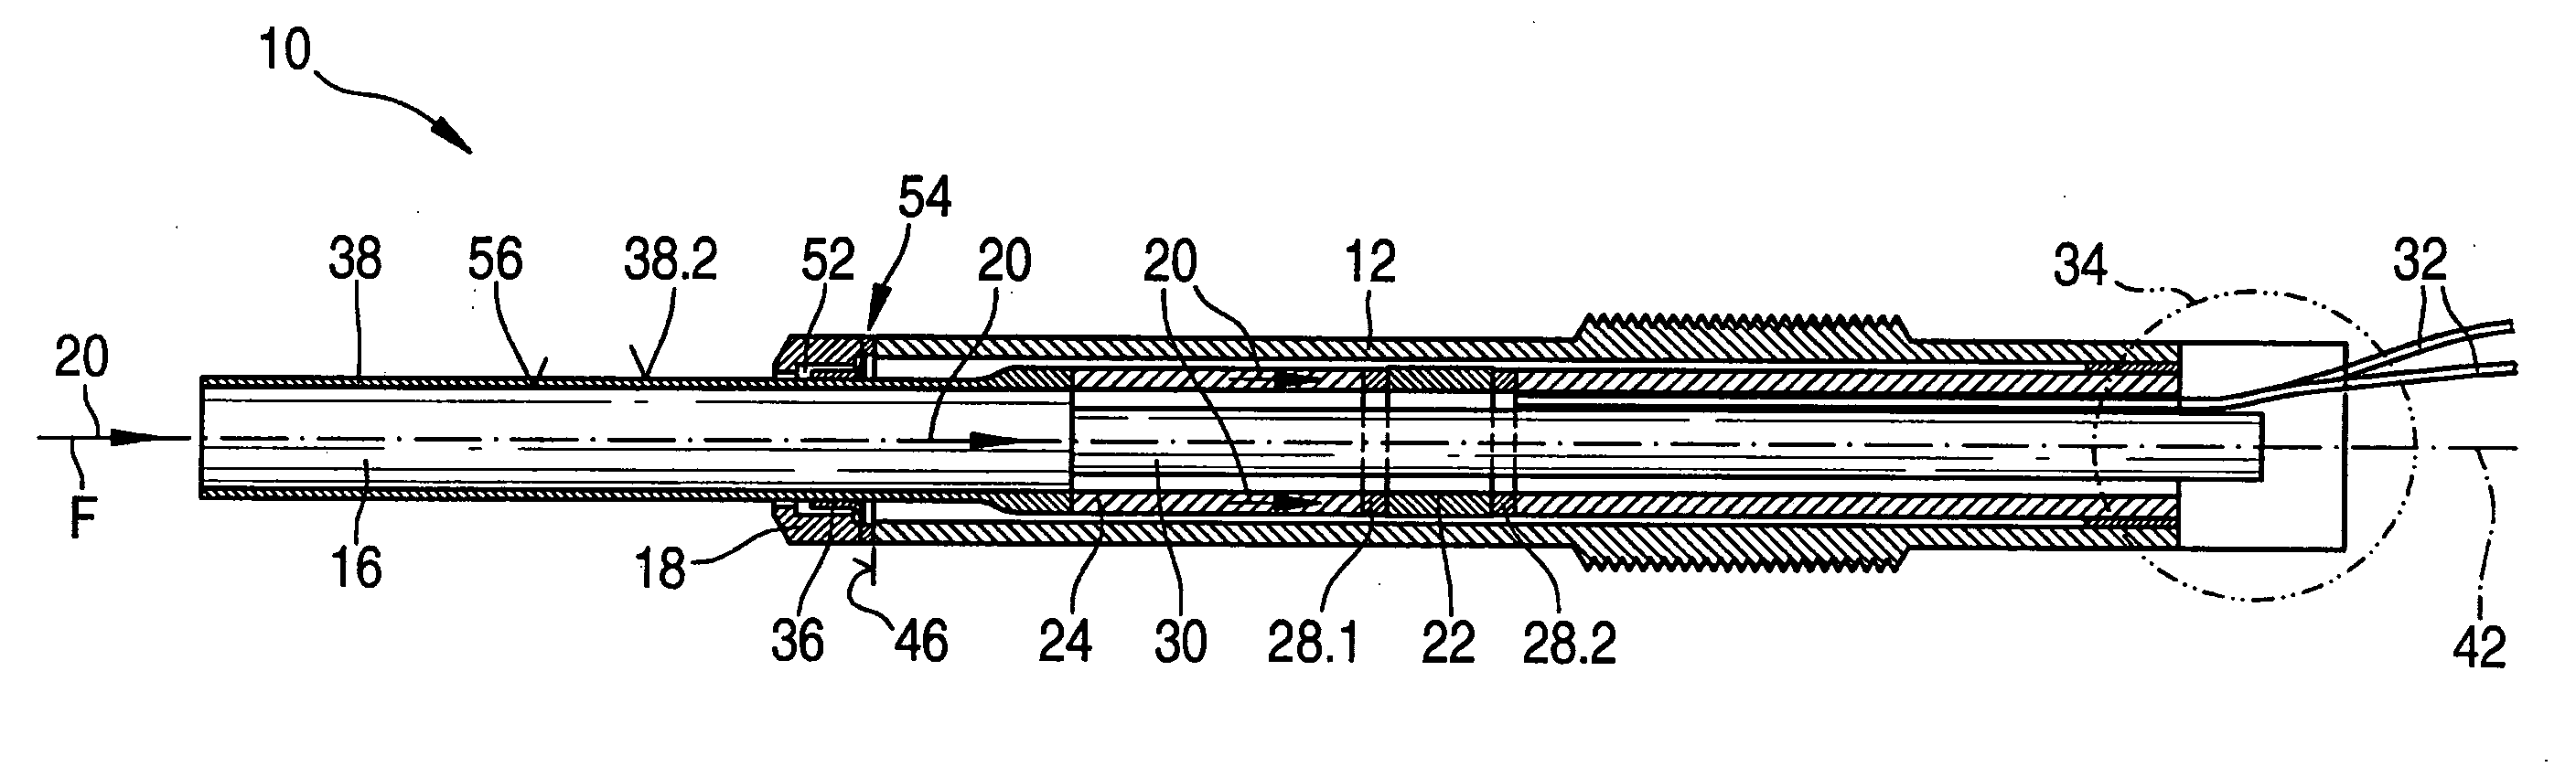 Pencil-Type Glow Plug Having an Integrated Combustion Chamber Pressure Sensor